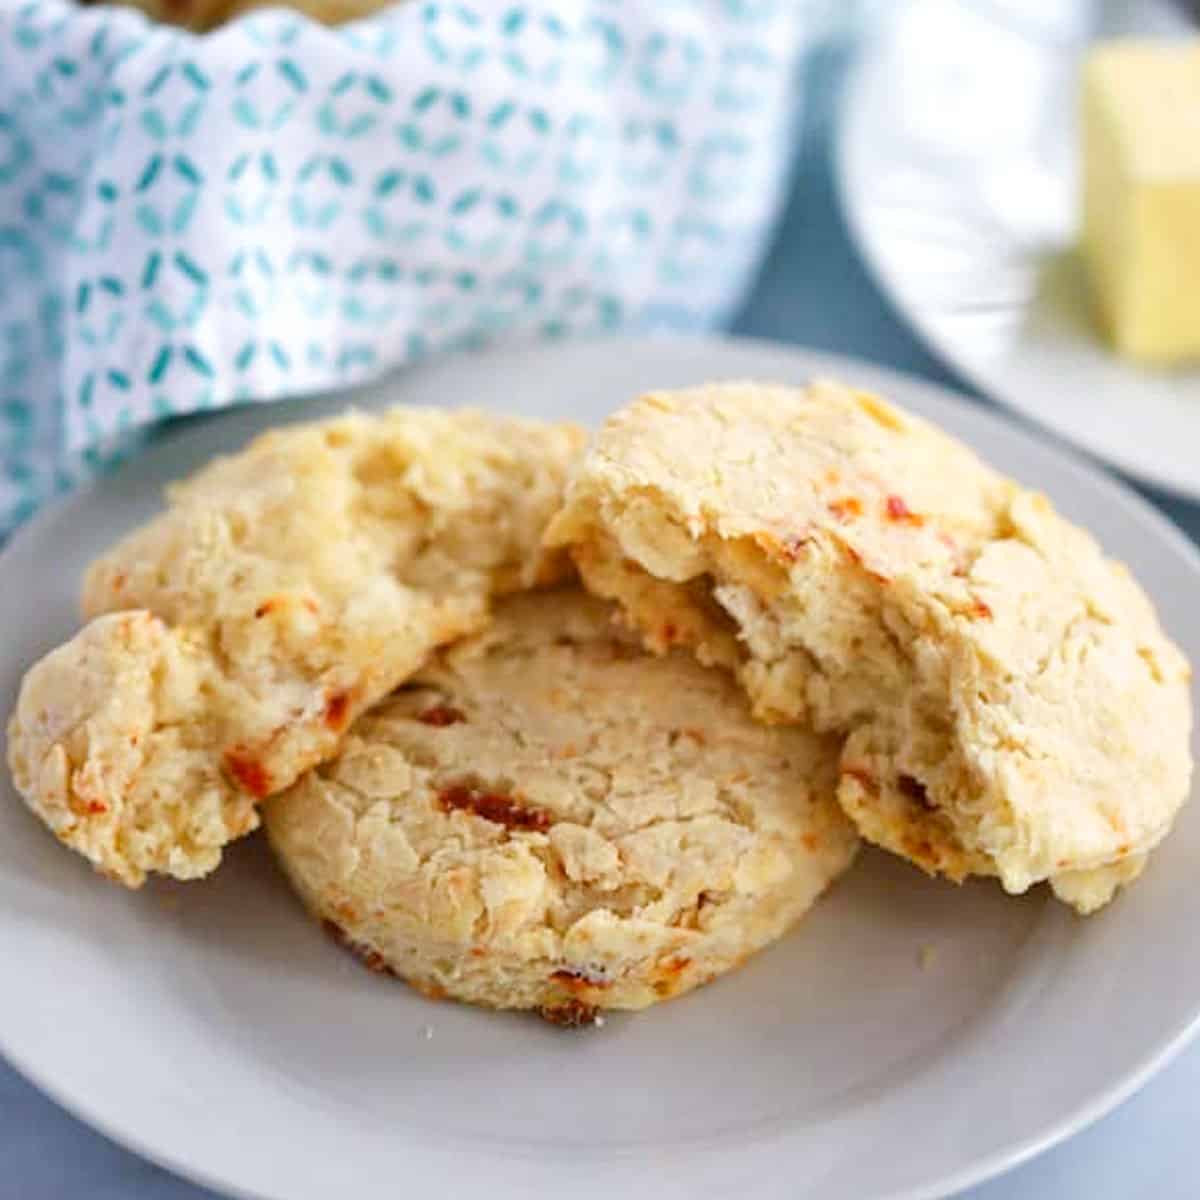 Parmesan and sun-dried tomato and biscuits are a tasty and flaky biscuit every one will love!